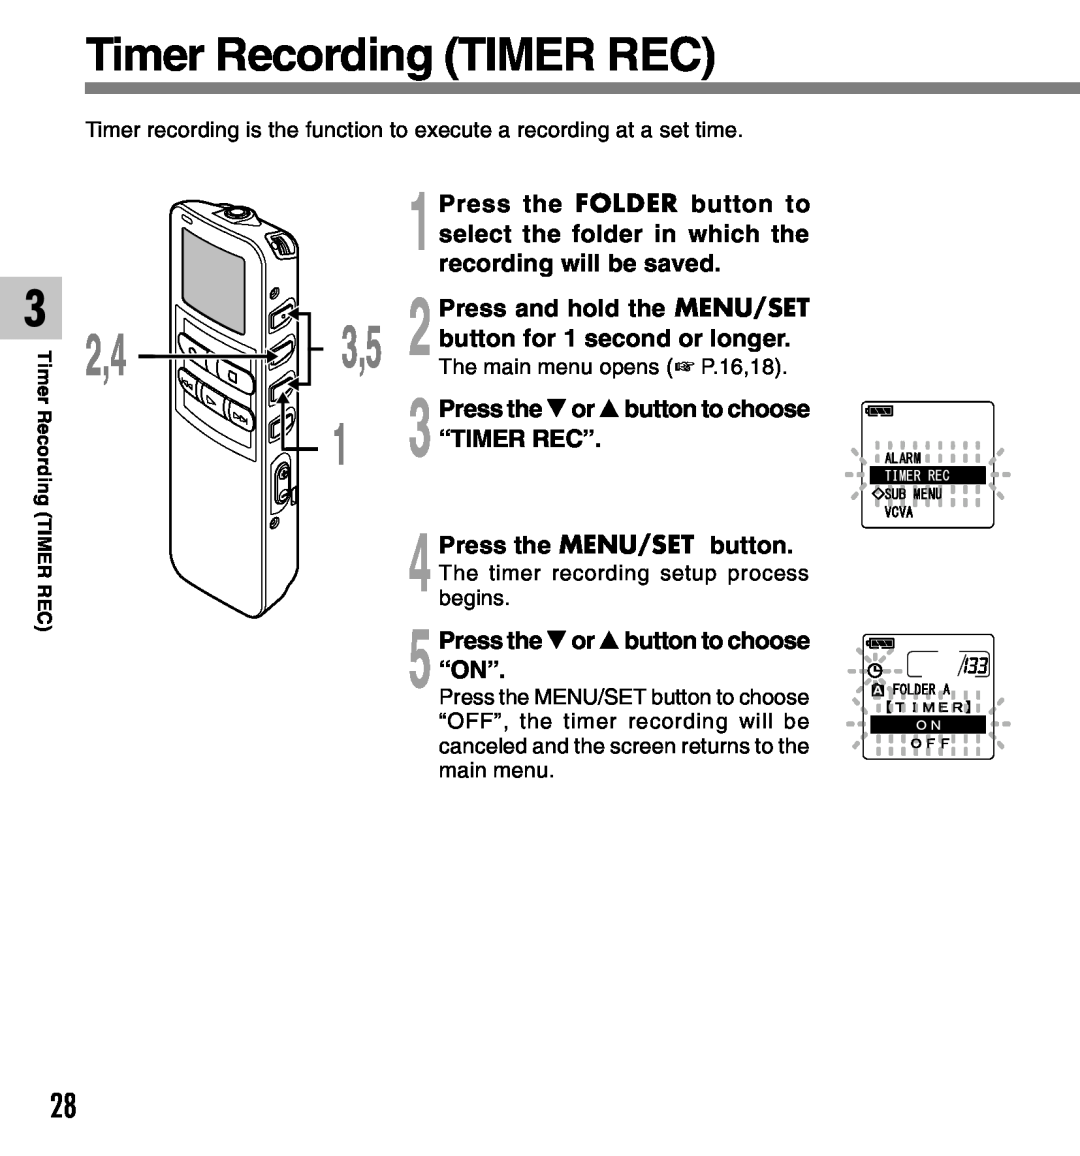 Olympus manual Timer Recording TIMER REC, 2,4 3,5, 5Press the 3or 2button to choose “ON” 